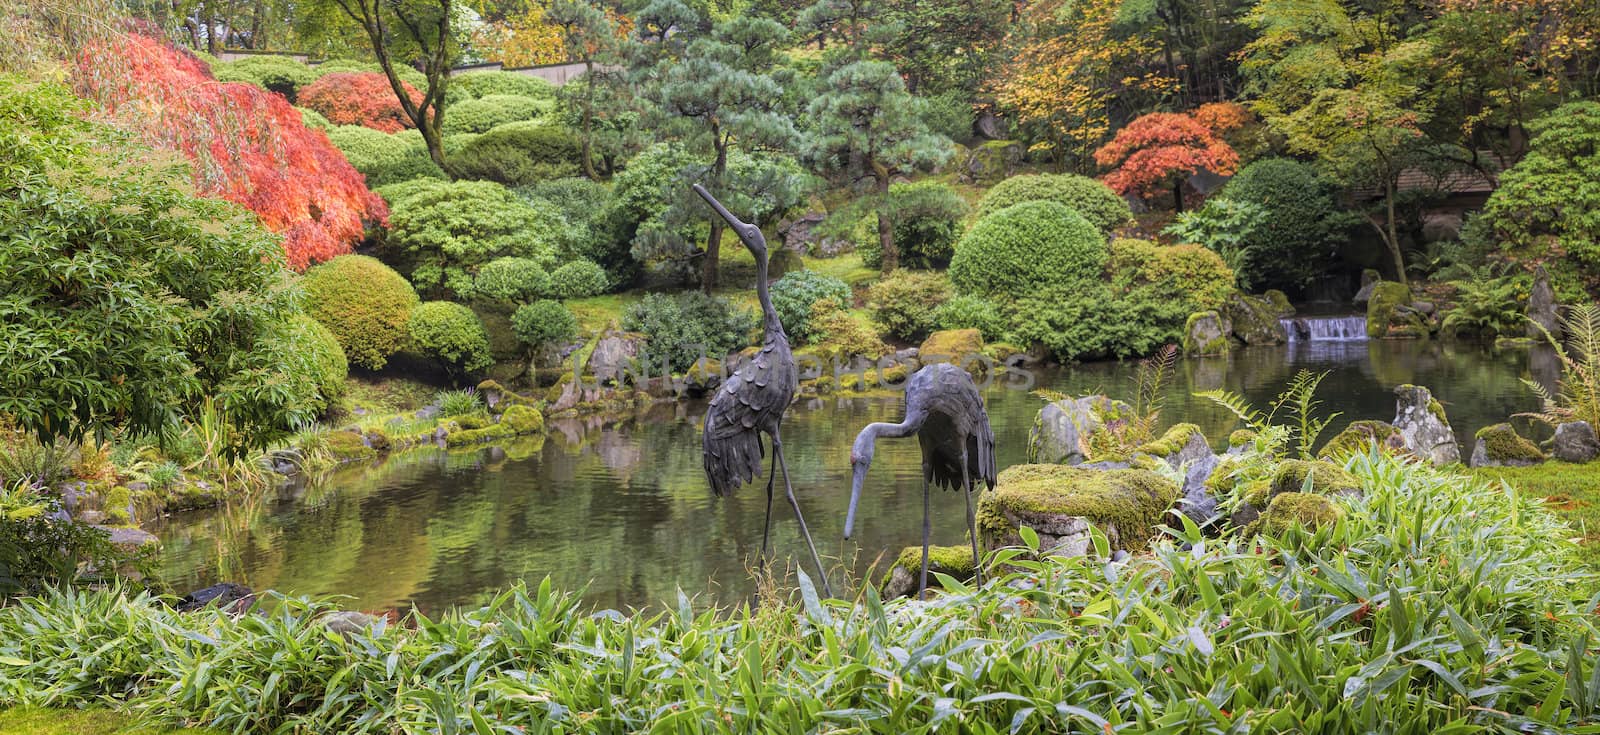 Japanese Bronze Cranes Sculpture Pair by Water Pond with Trees Plants and Shrubs in the Fall Panorama